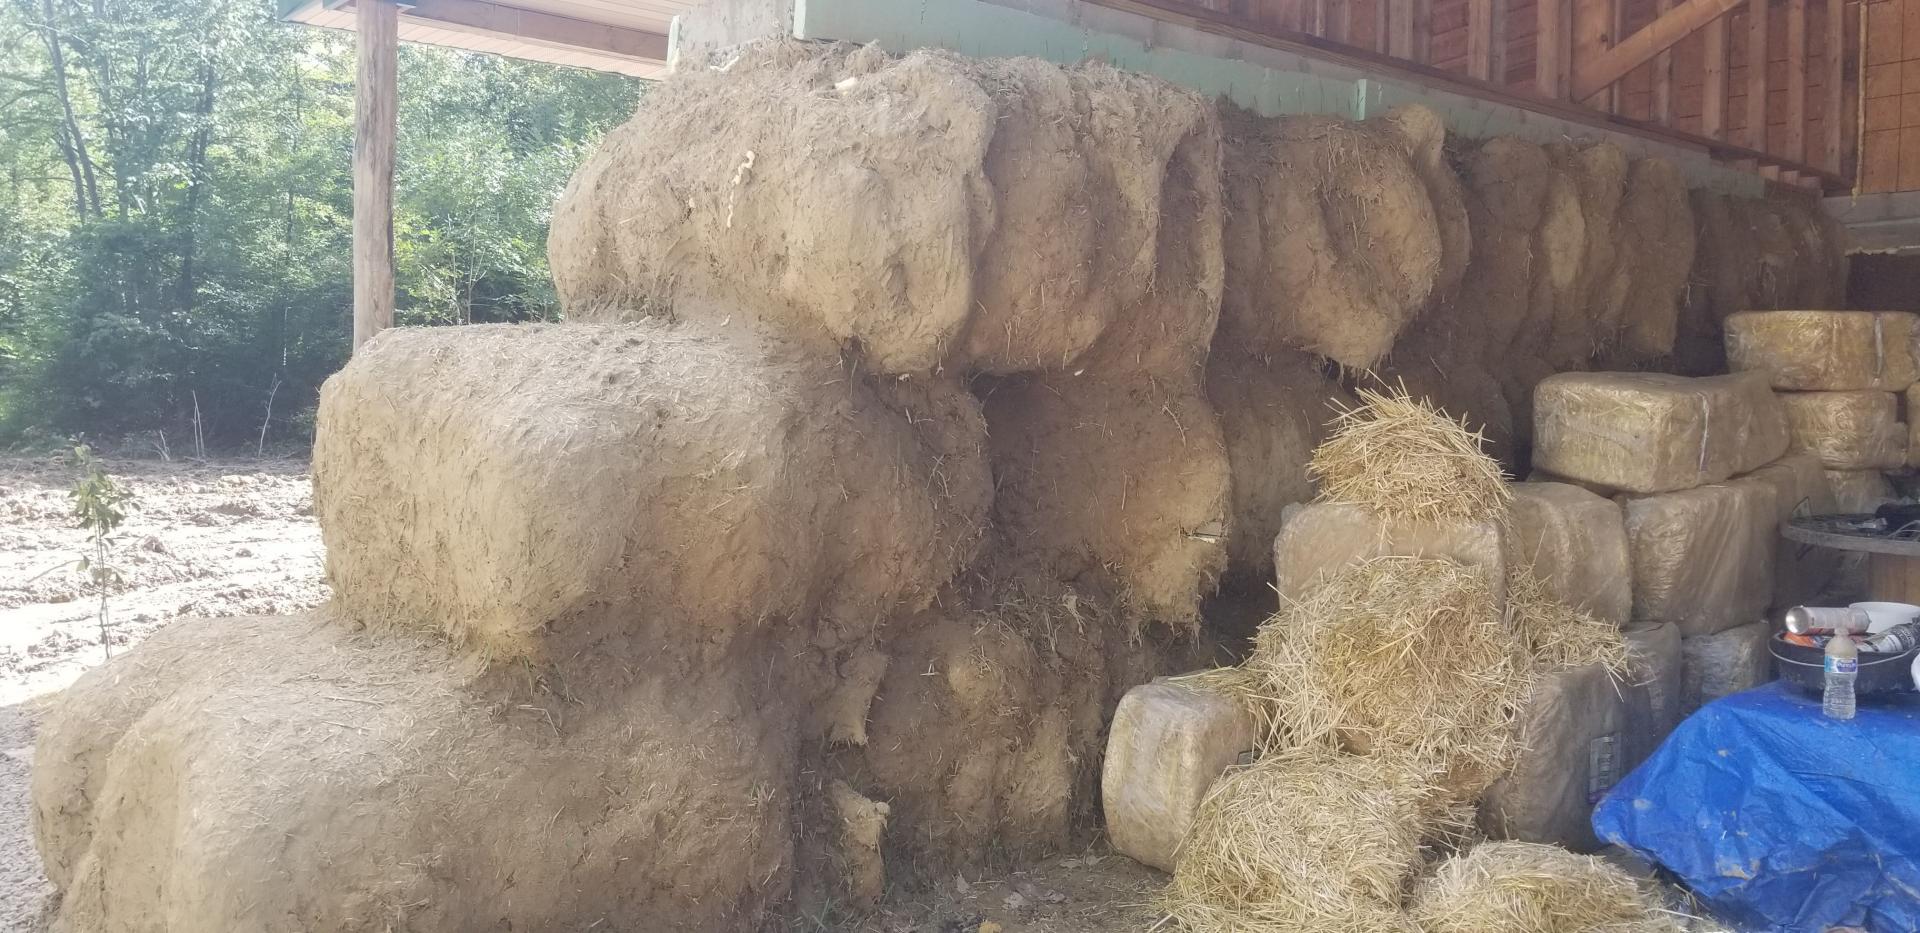 Covering the Tire Bales with Cob